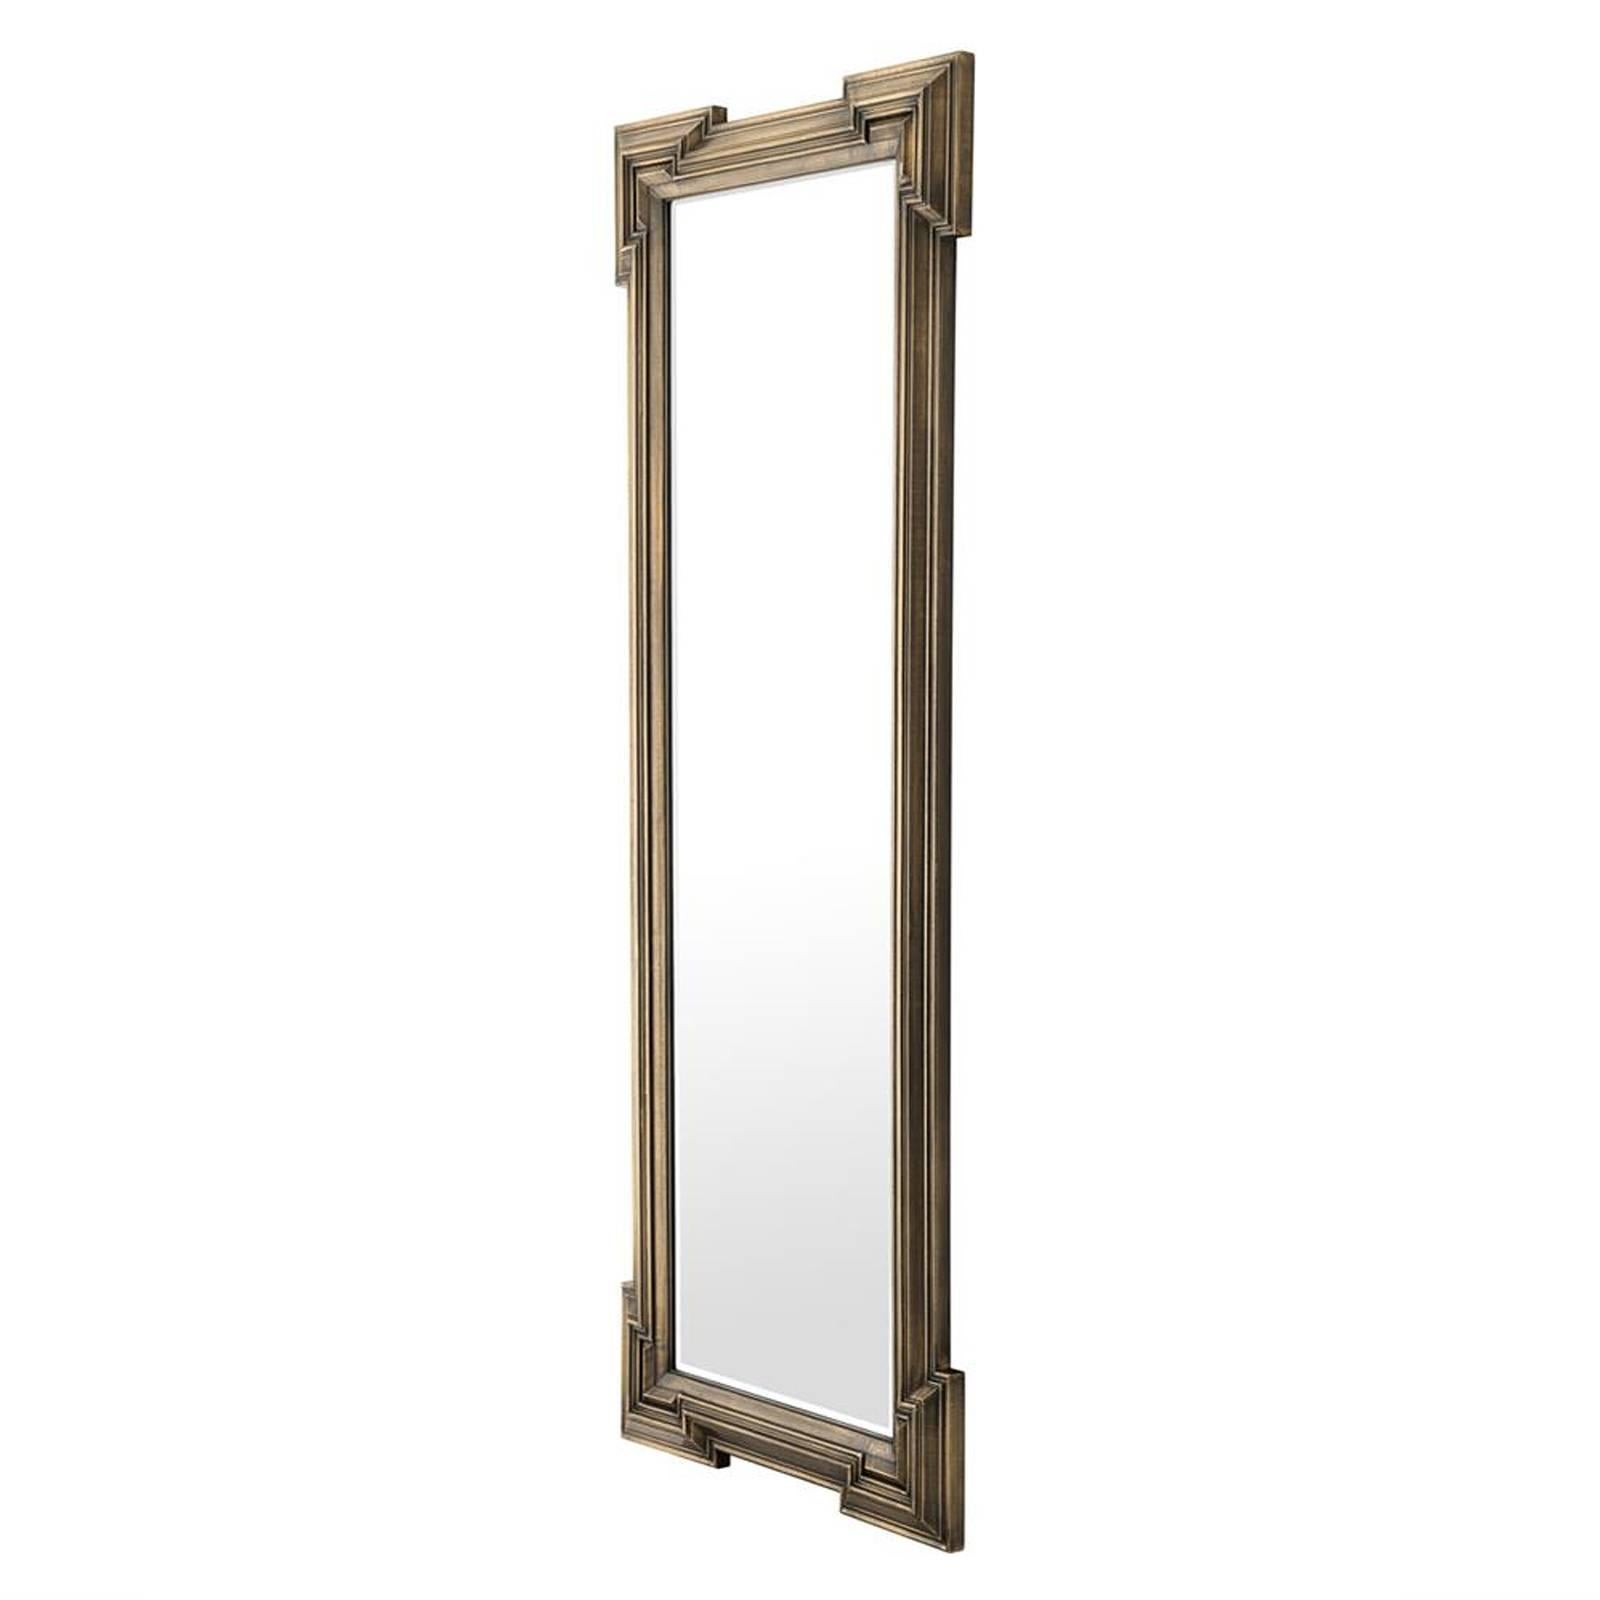 Mirror Scuadro with antique brass finish rectangular 
frame and bevelled mirror glass. Elegant piece.
Also available with square frame.
